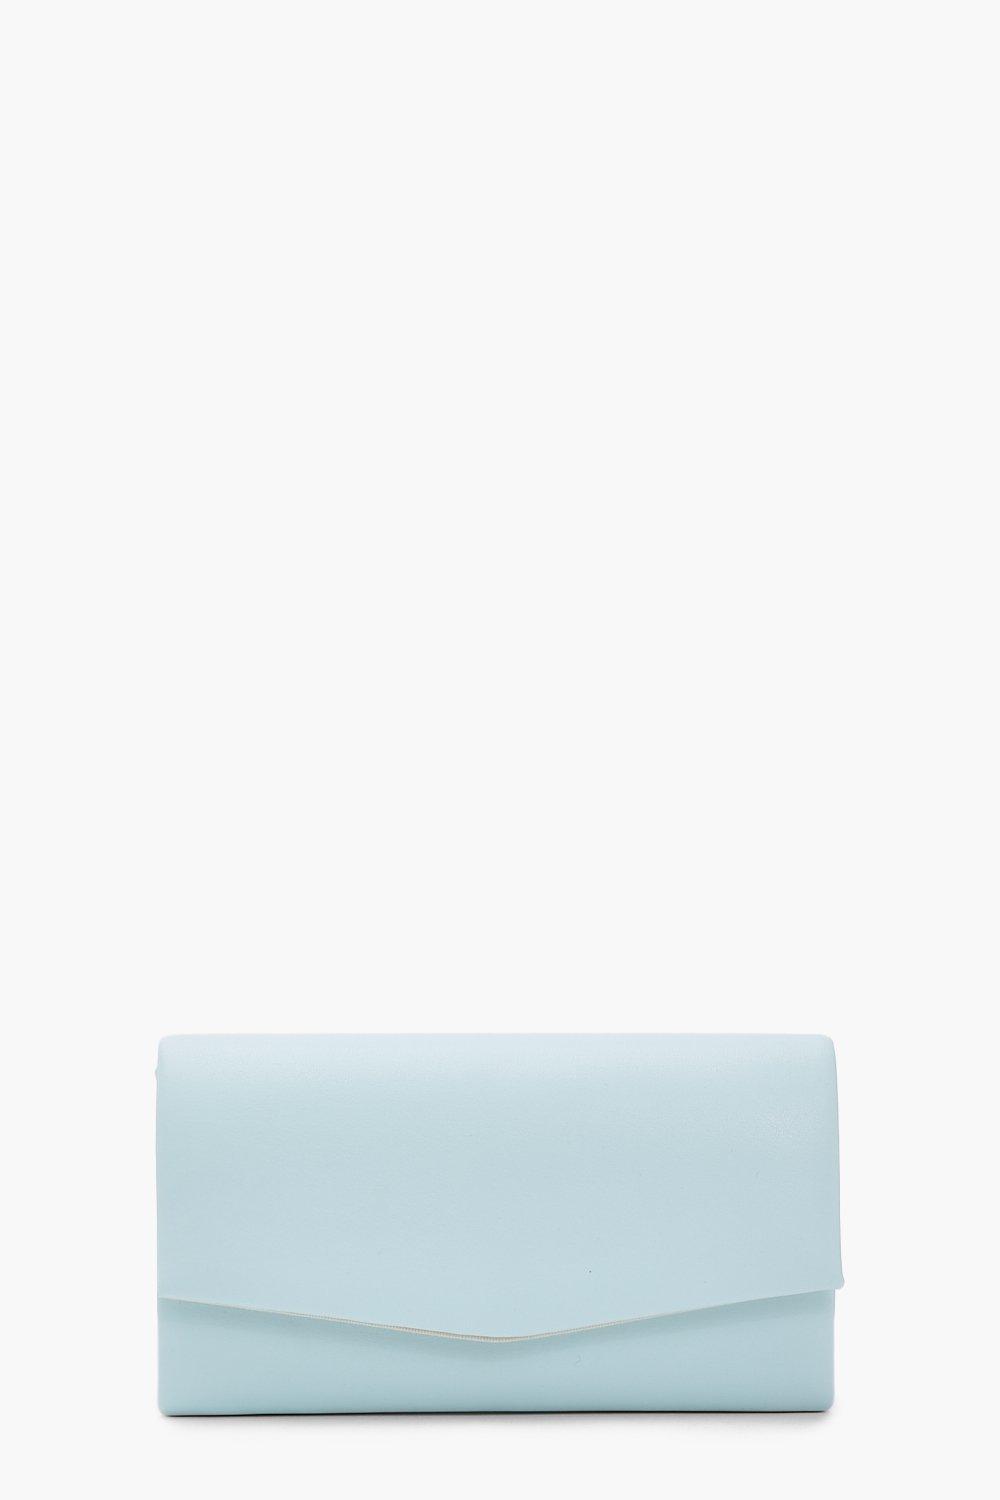 Boohoo Basic Structured Clutch, Turquoise